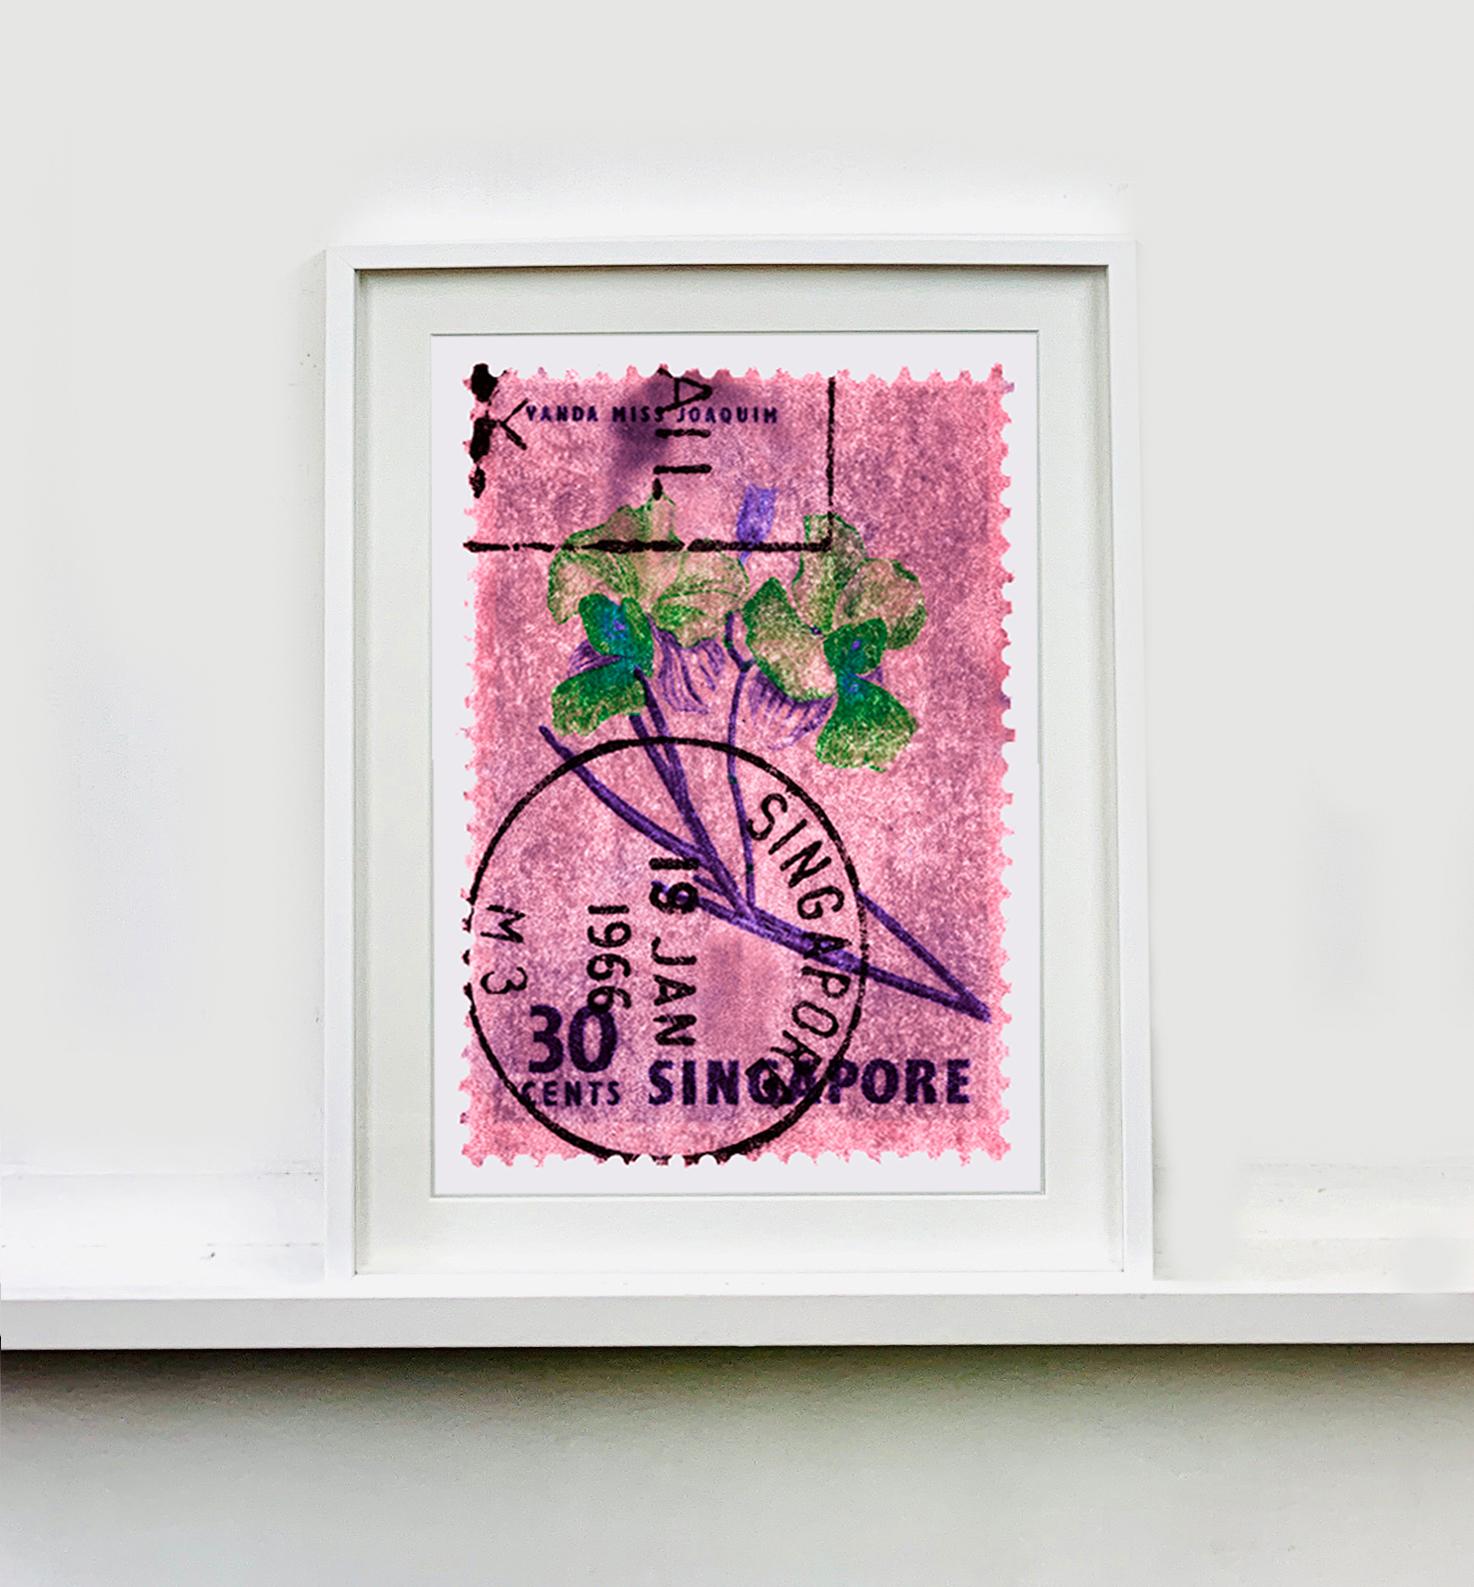 Singapore Stamp Collection, 30c Singapore Orchid Pink - Floral color photo - Conceptual Print by Heidler & Heeps